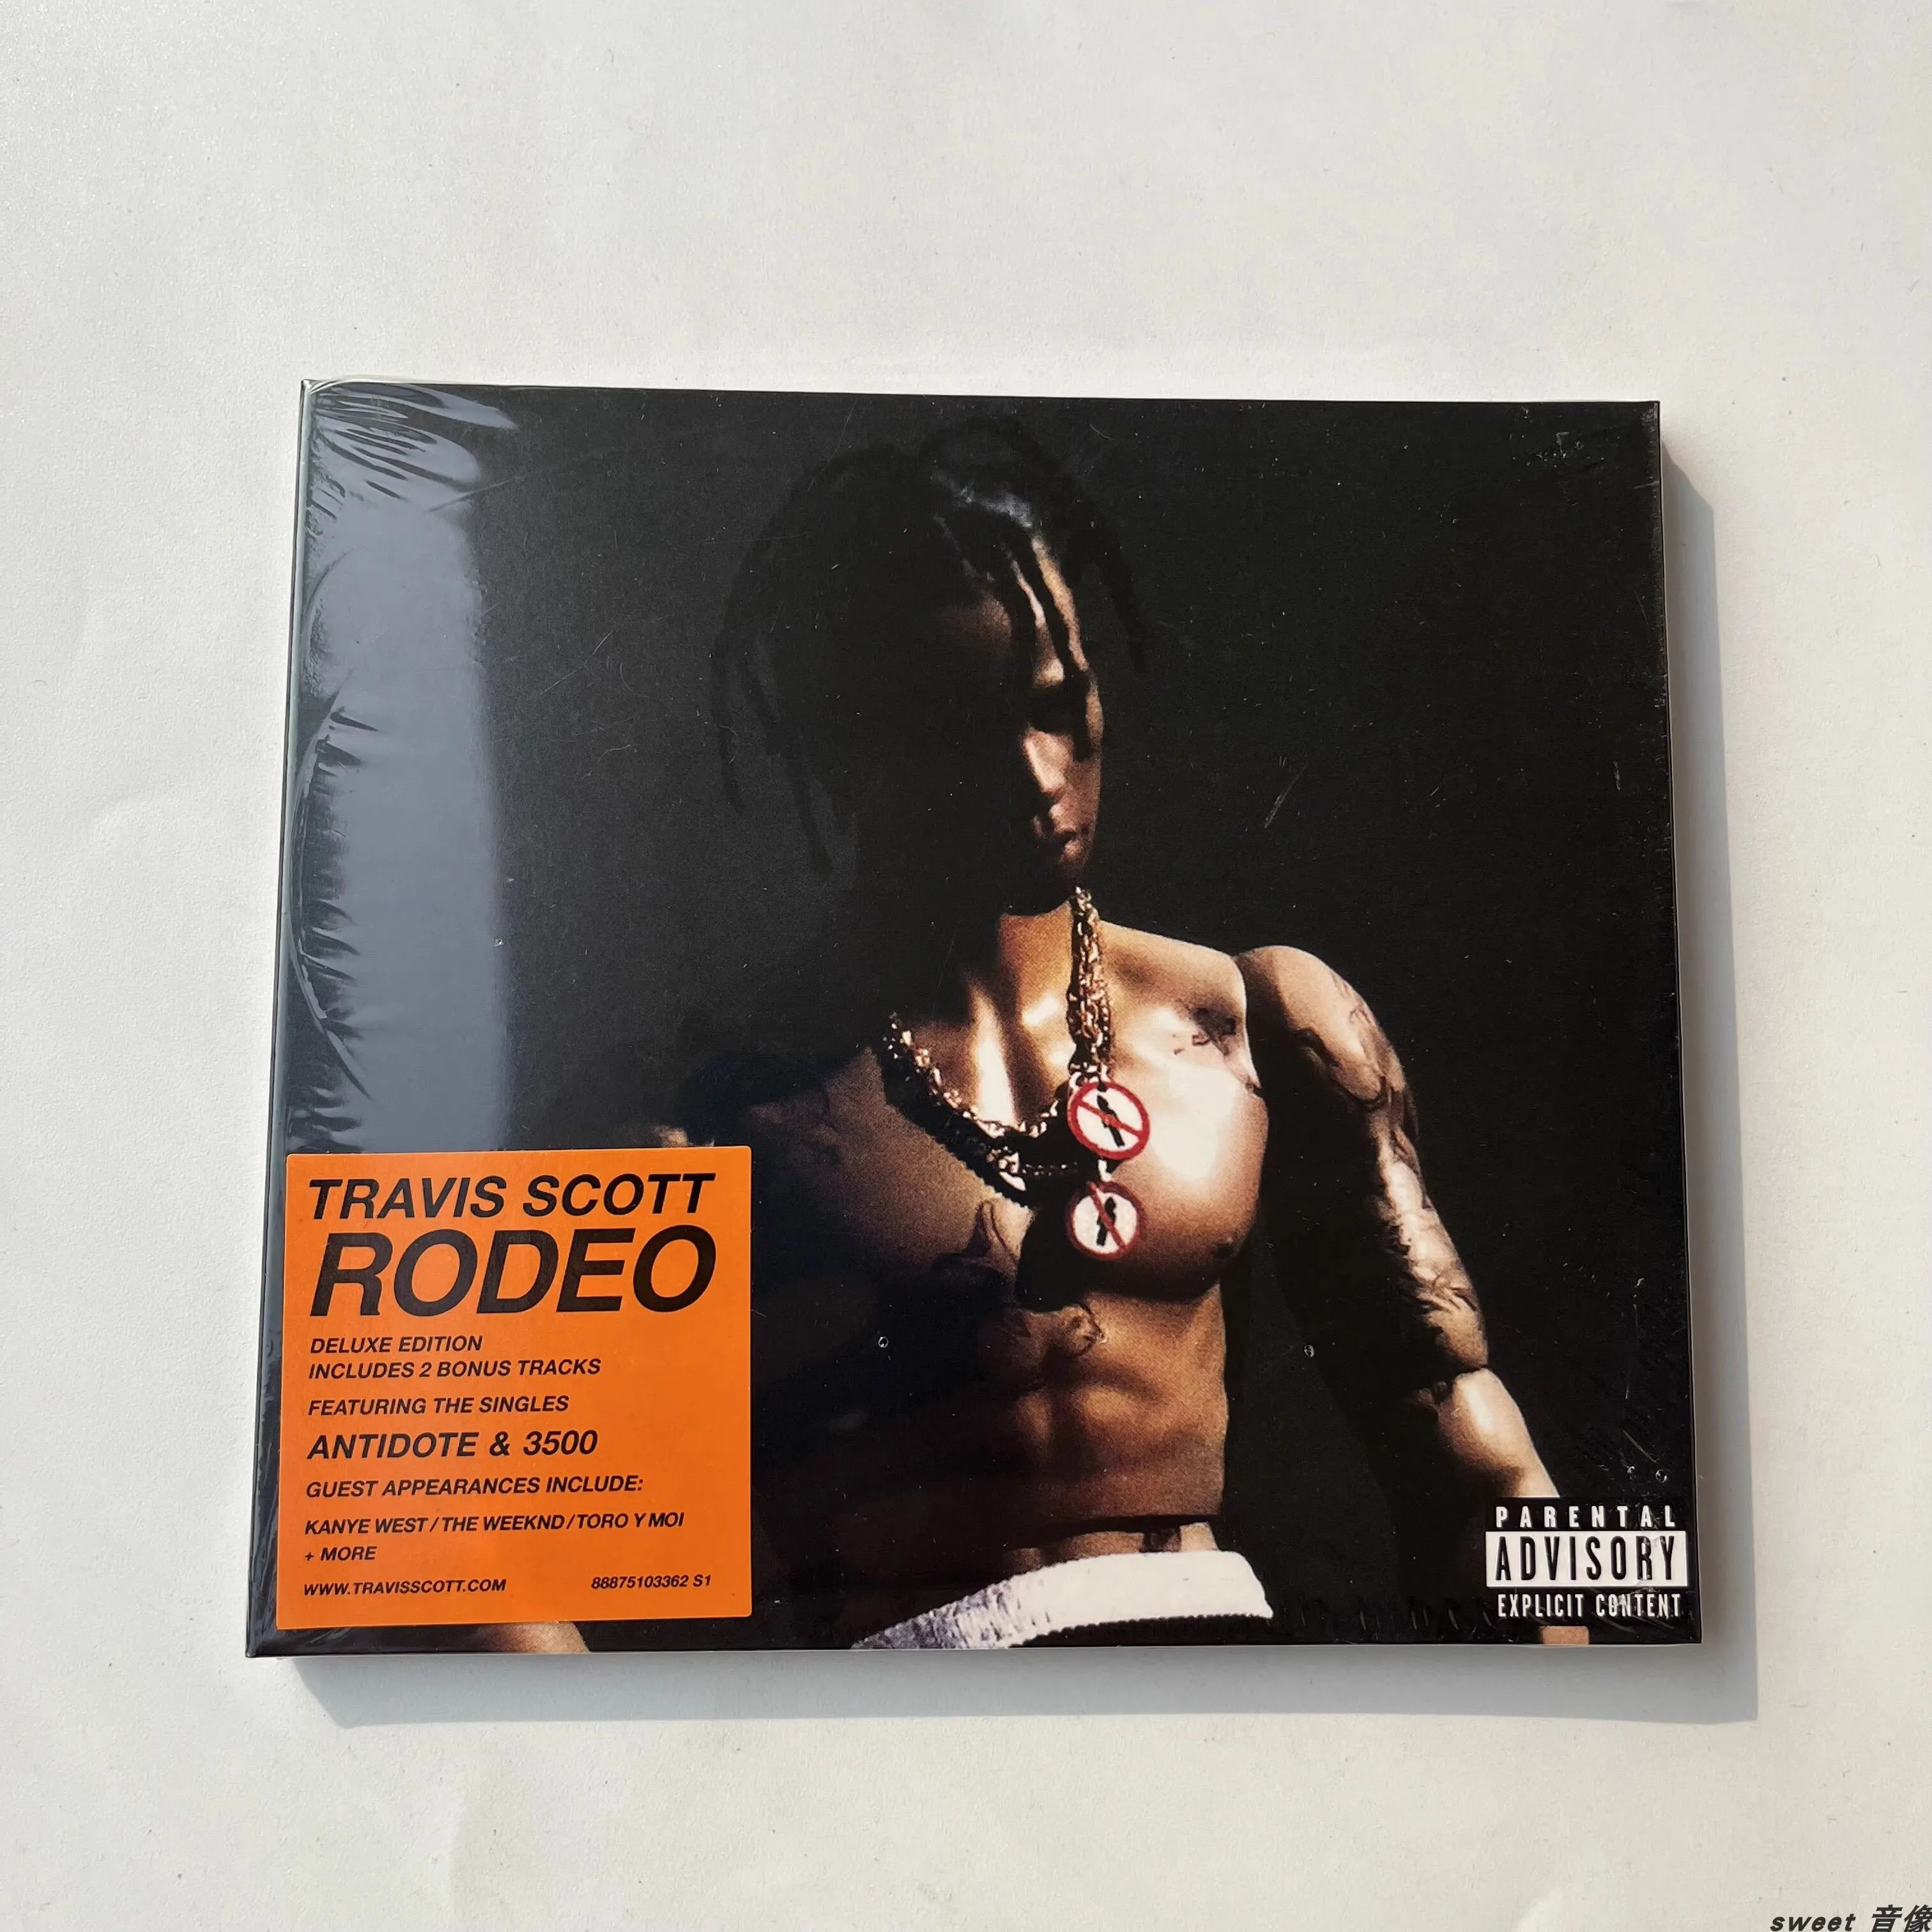 

Retro Travis Scott Music CD Rodeo Album Compact Disc Cosplay CD Walkman Car Play Songs Soundtracks Box Party Music Gifts